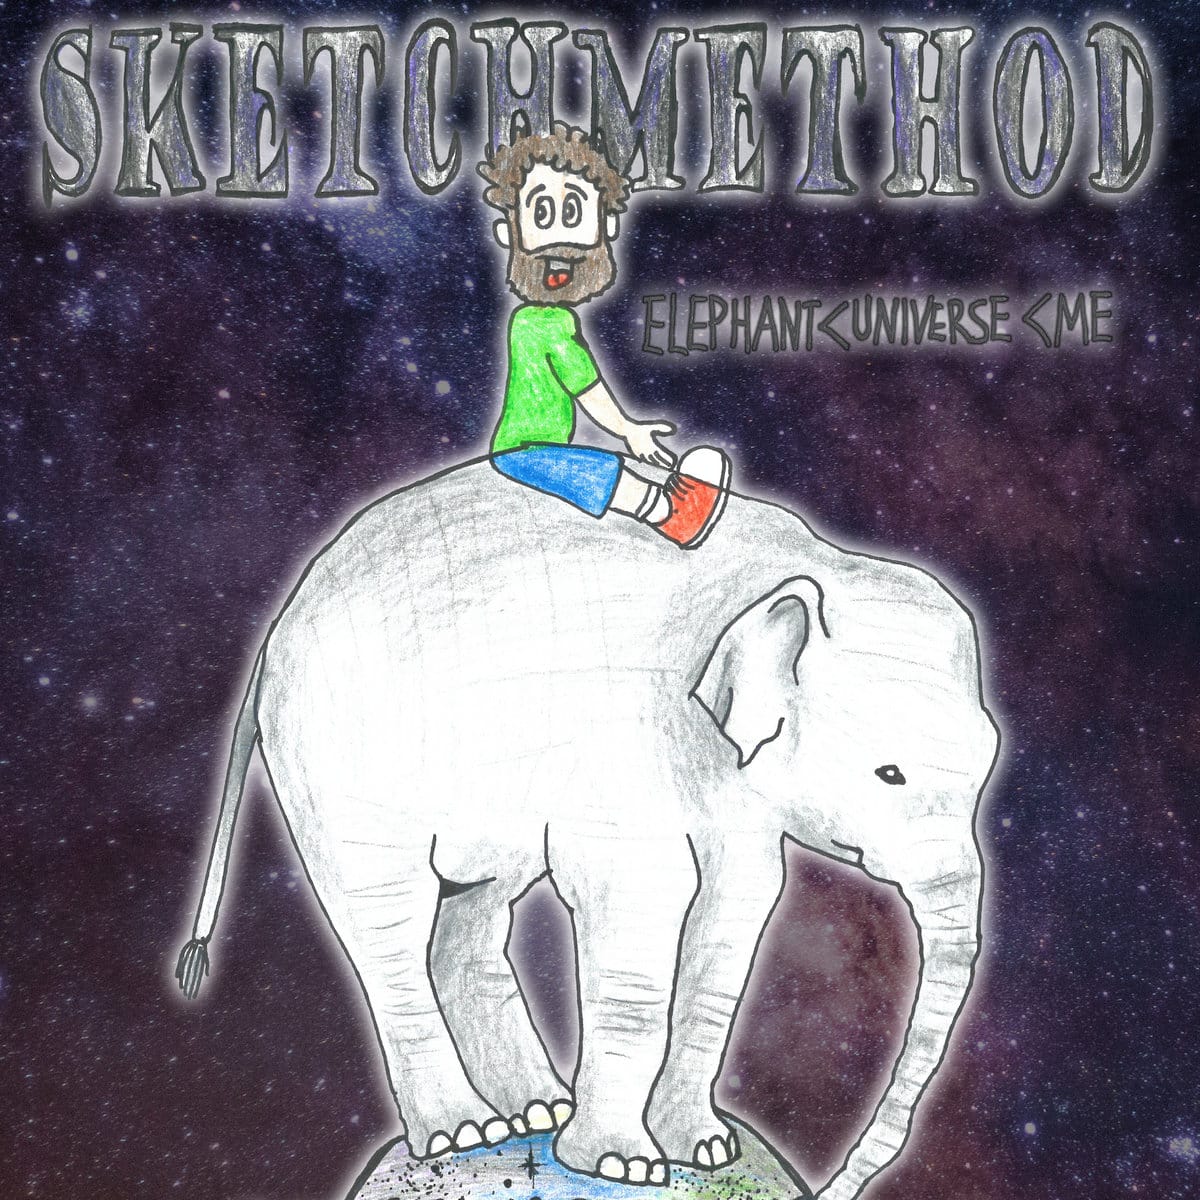 Cover art for Elephant Universe Me by Sketch Method